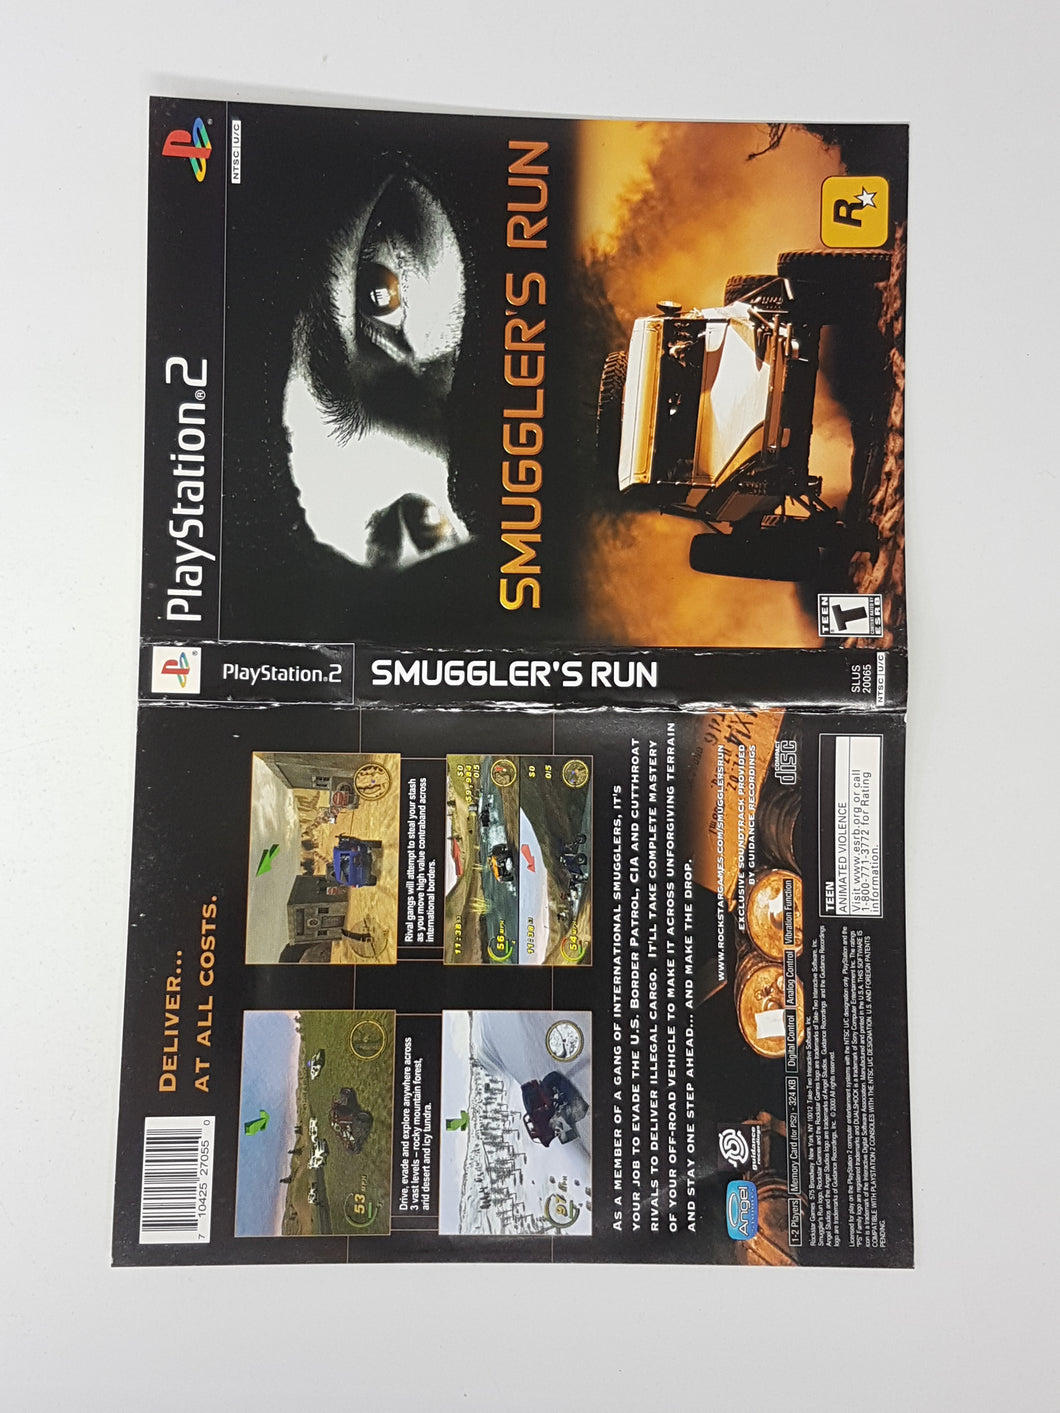 Smuggler's Run [Couverture] - Sony Playstation 2 | PS2